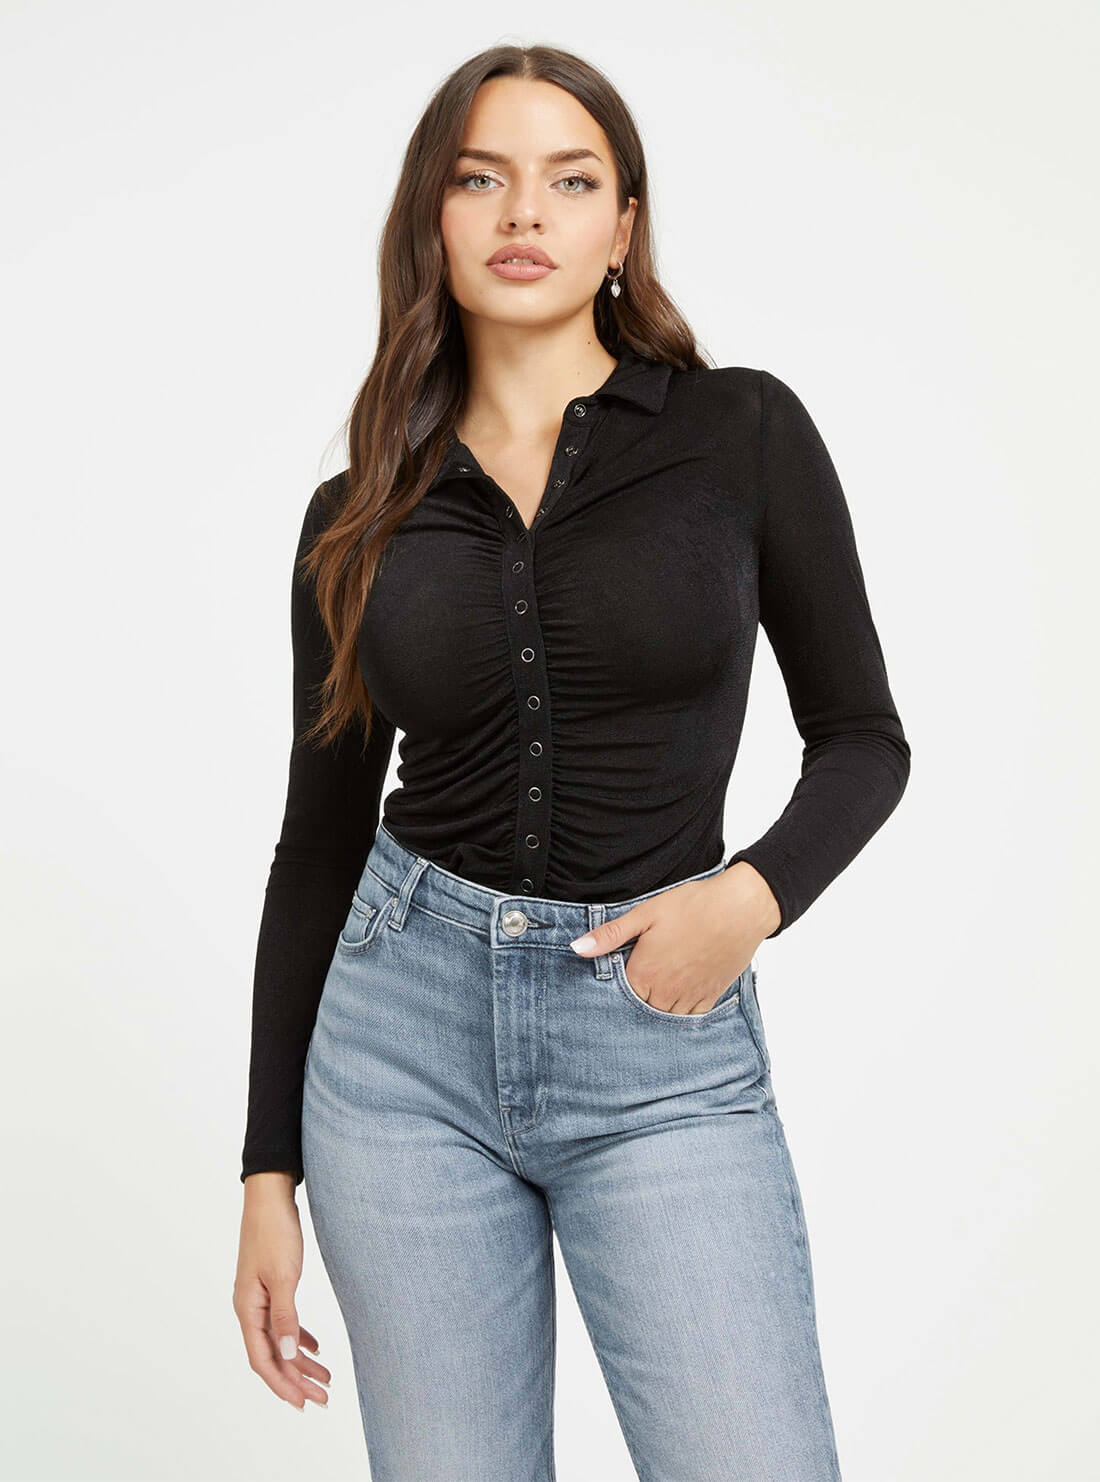 Black Milana Long Sleeve Top | GUESS Women's Apparel | front view